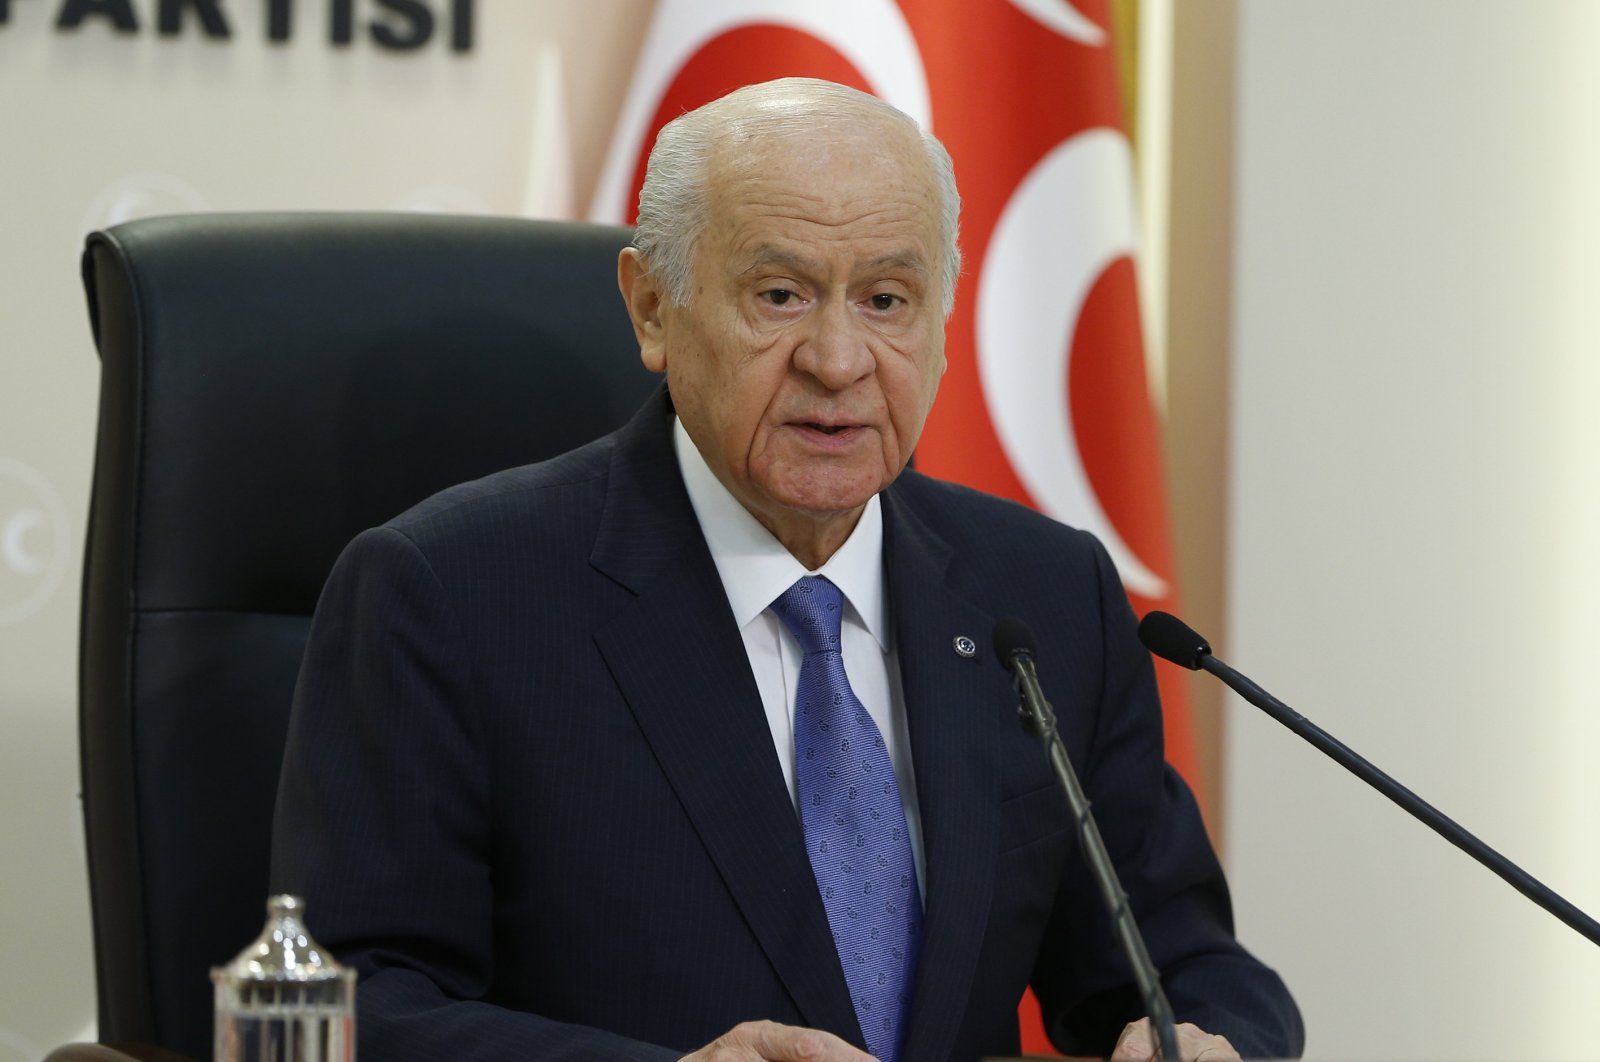 Nationalist Movement Party (MHP) Chairman Devlet Bahçeli speaks during a press conference in his party's Ankara headquarters, Turkey, Aug. 8, 2020 (AA Photo)